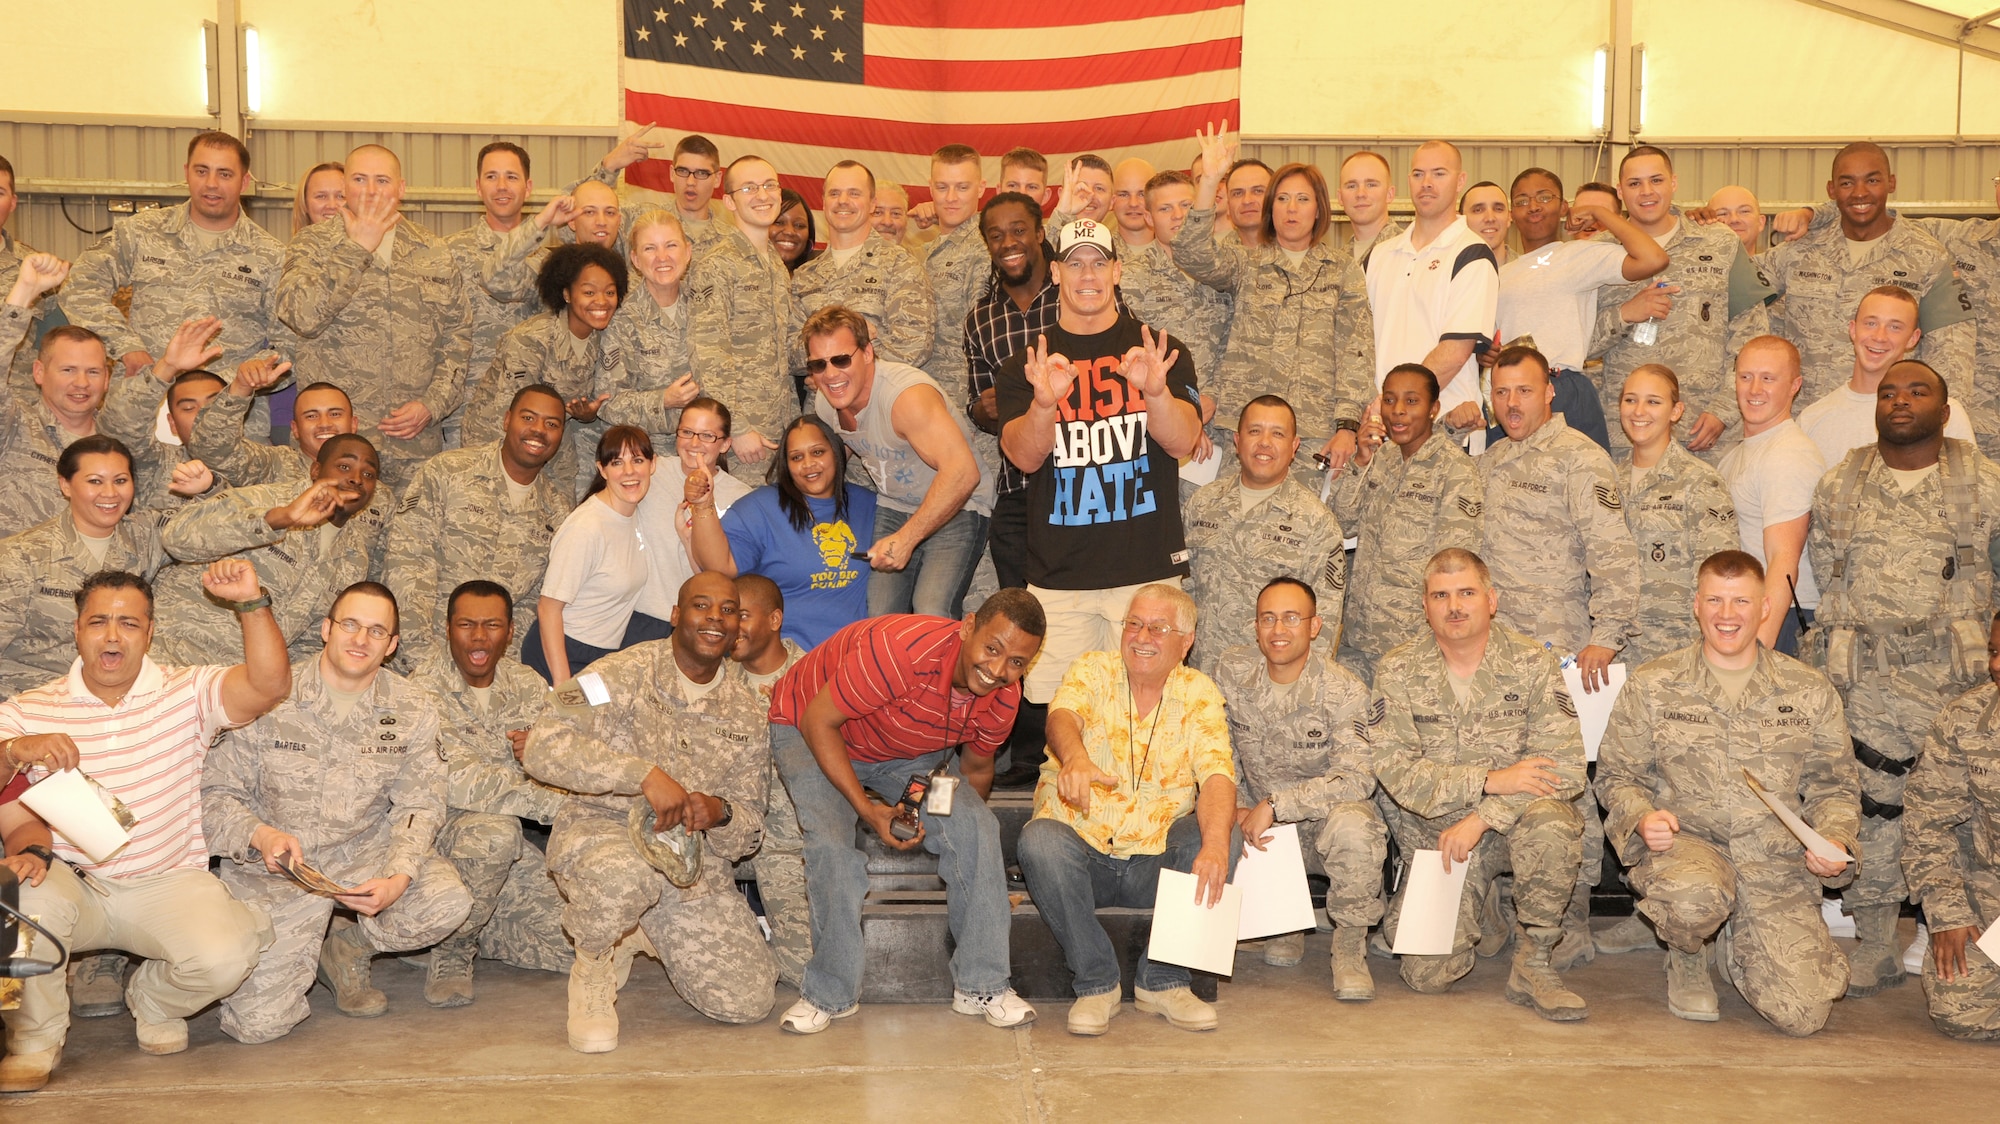 SOUTHWEST ASIA - World Wrestling Entertainment superstars John Cena, Chris Jericho and Kofi Kingston visit with members from the 380th Air Expeditionary Wing Feb. 10, 2012. As part of a USO tour, the wrestlers took photos and signed autographs with more than 200 Airmen and Soldiers assigned to the wing. (U.S. Air Force photo/Tech. Sgt. Arian Nead)